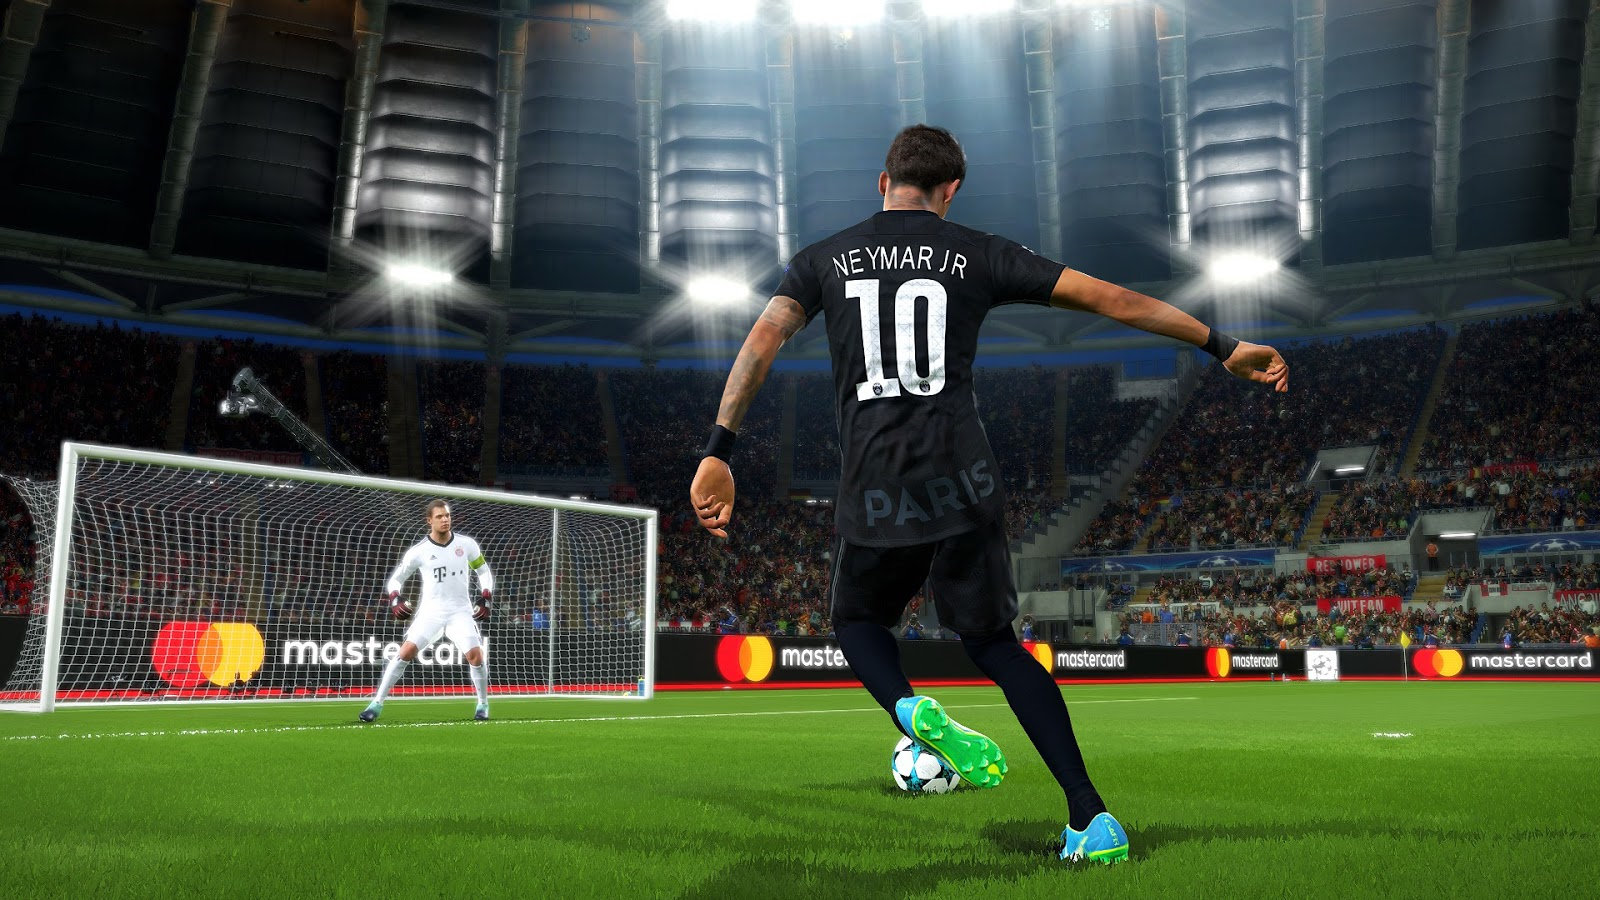 PES 2018 PES Professionals Patch 2018 Update v2.1 Season 